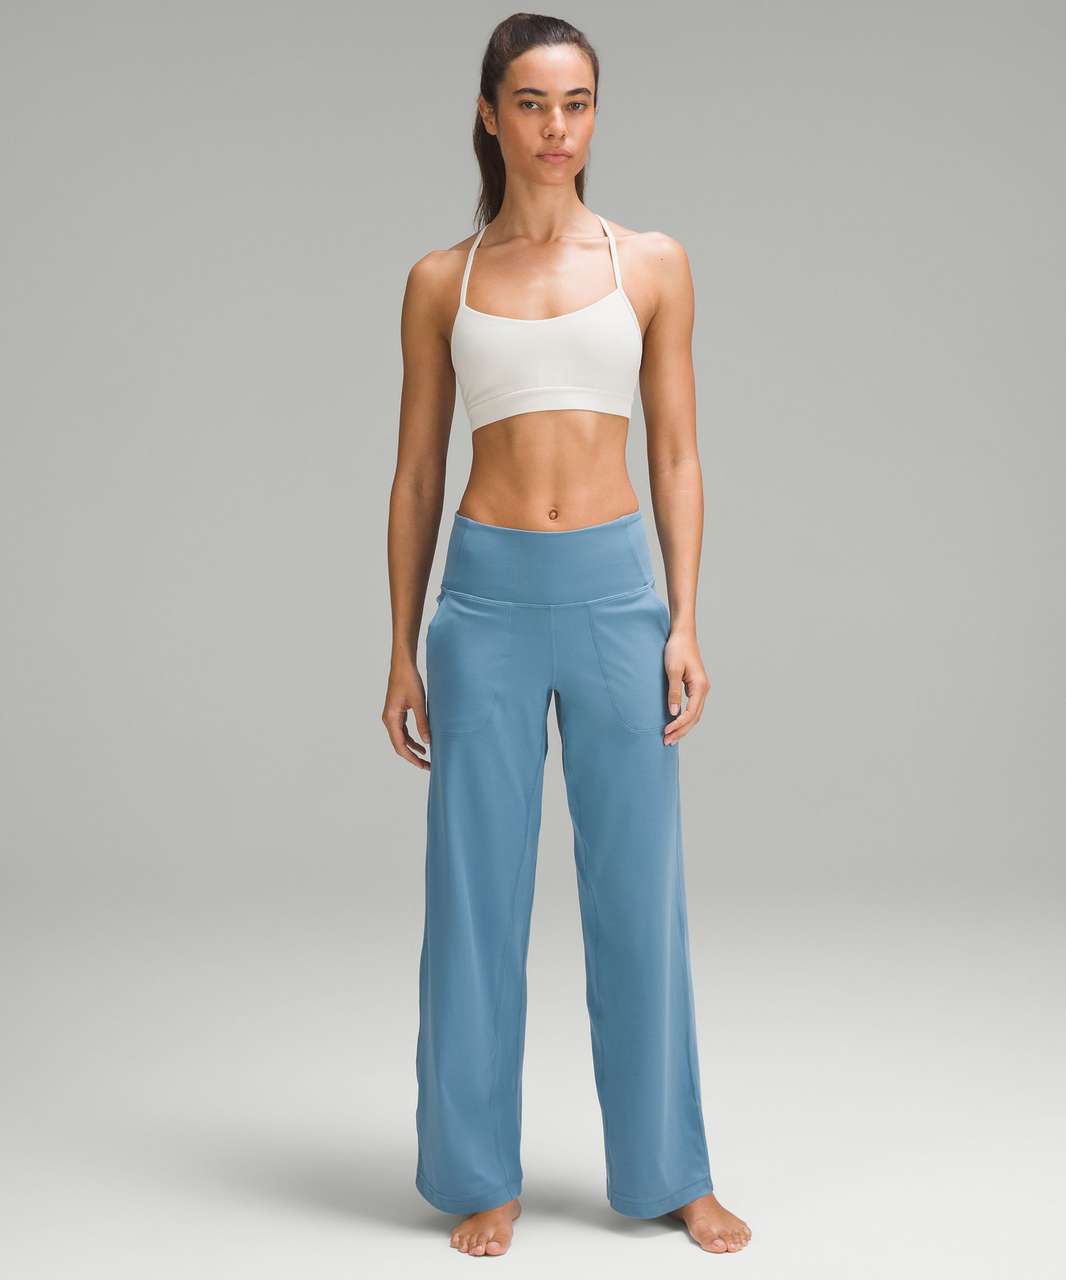 Lululemon Mid-Rise Wide Leg Pant. The girl math wasn't adding up to $1